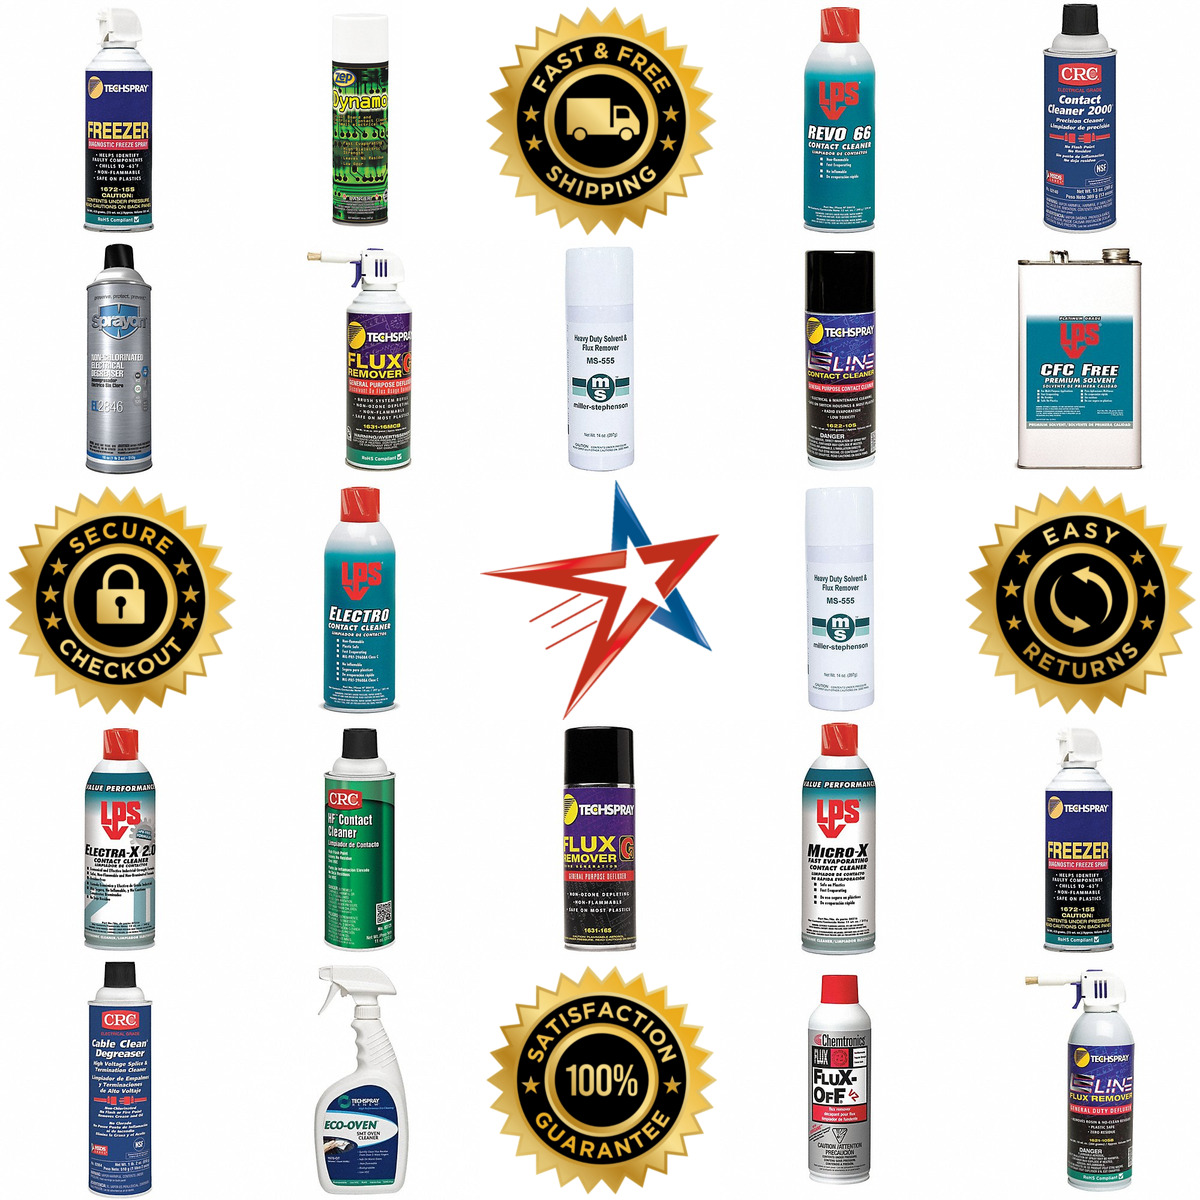 A selection of Electrical Contact Cleaners products on GoVets